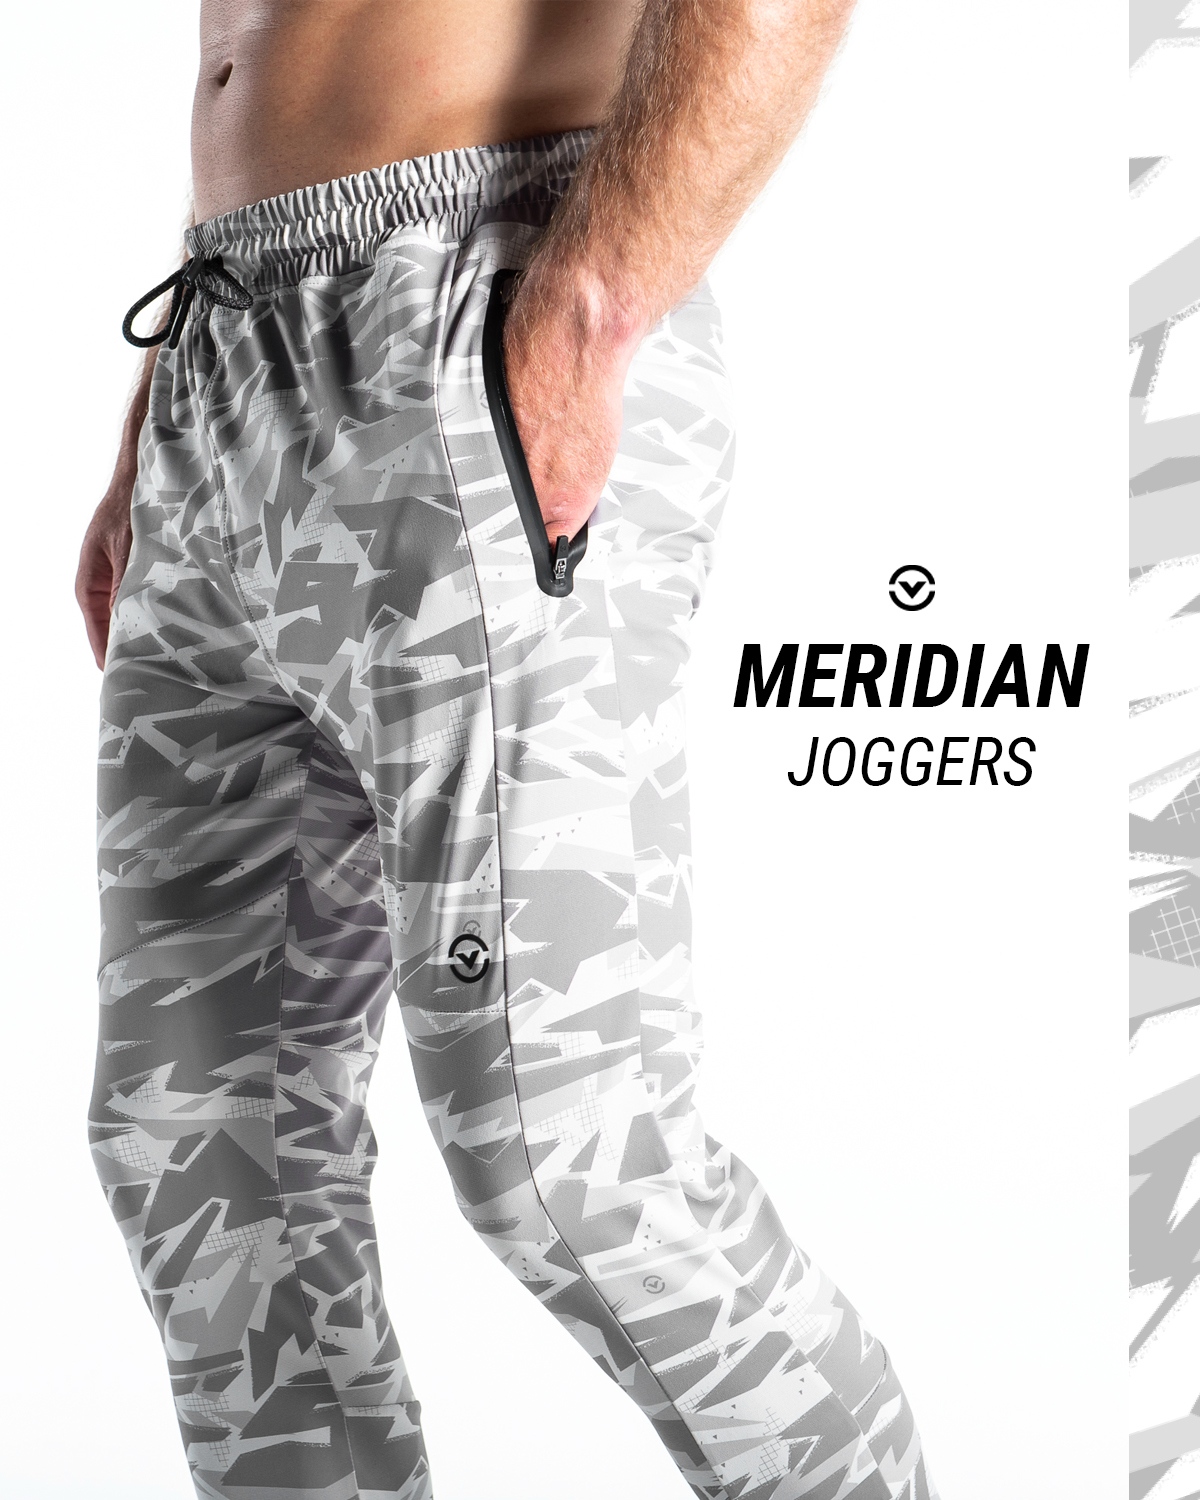 VIRUS on X: Meridian Jogger OUT NOW! — The first time I wore